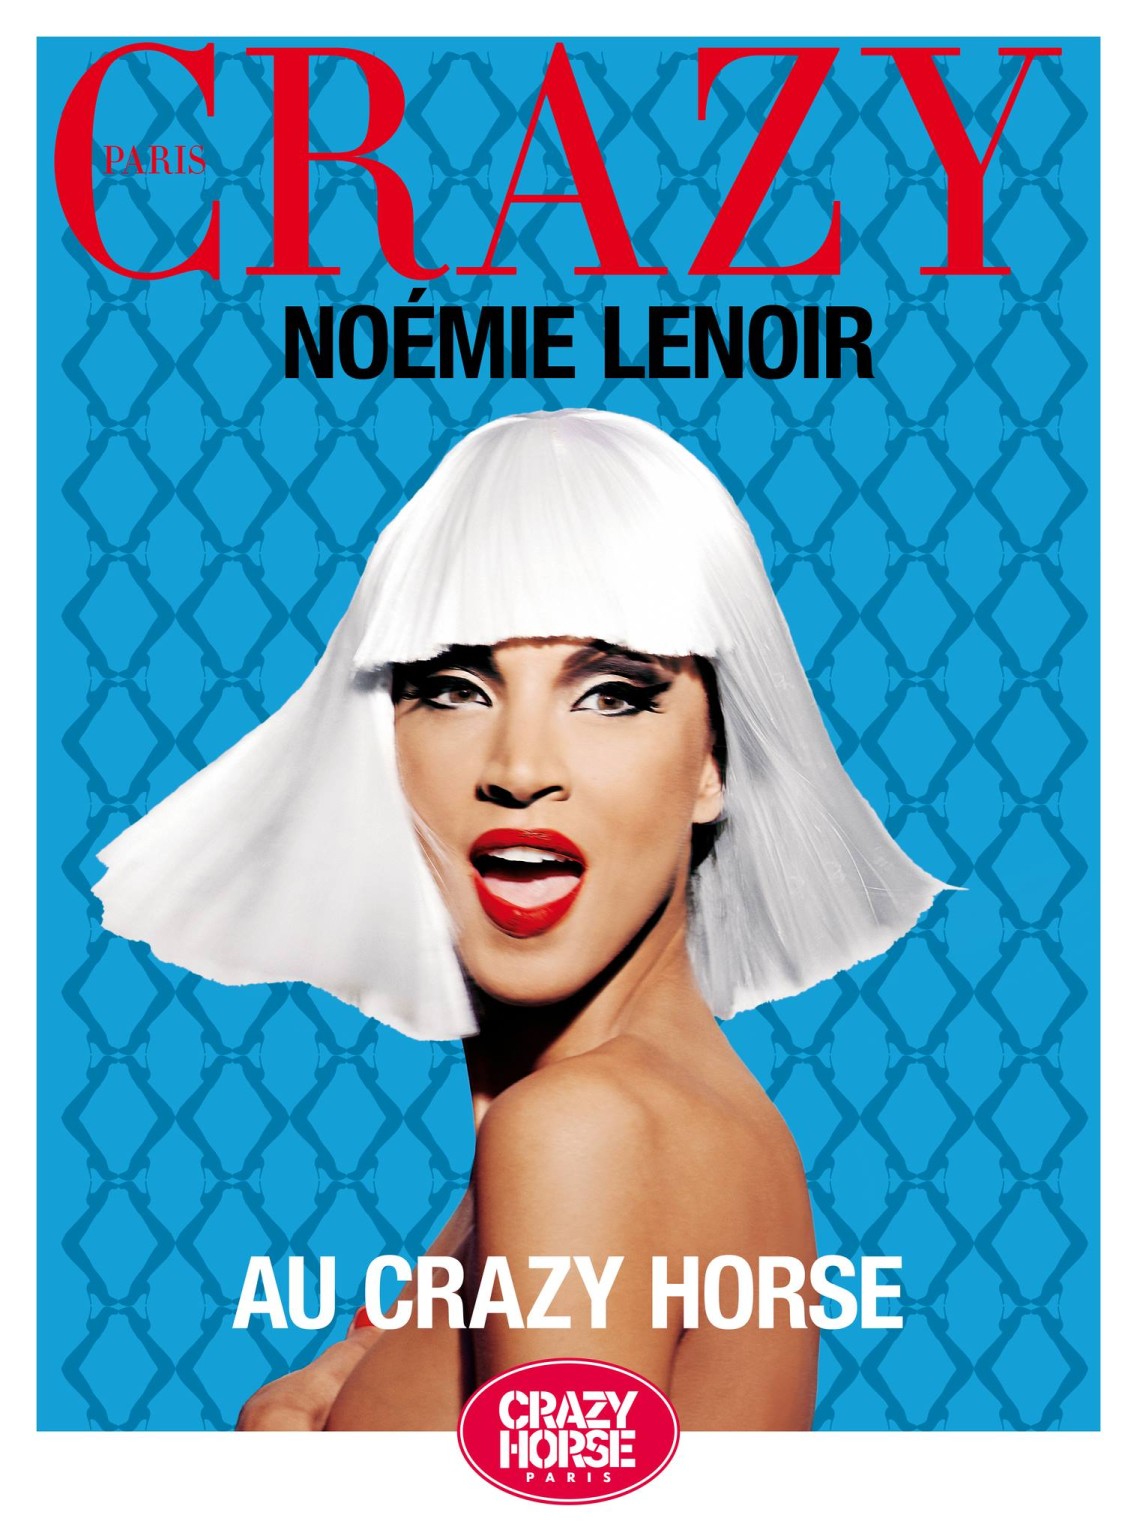 Noemie Lenoir performing topless in her show at the Crazy Horse Paris #75210914